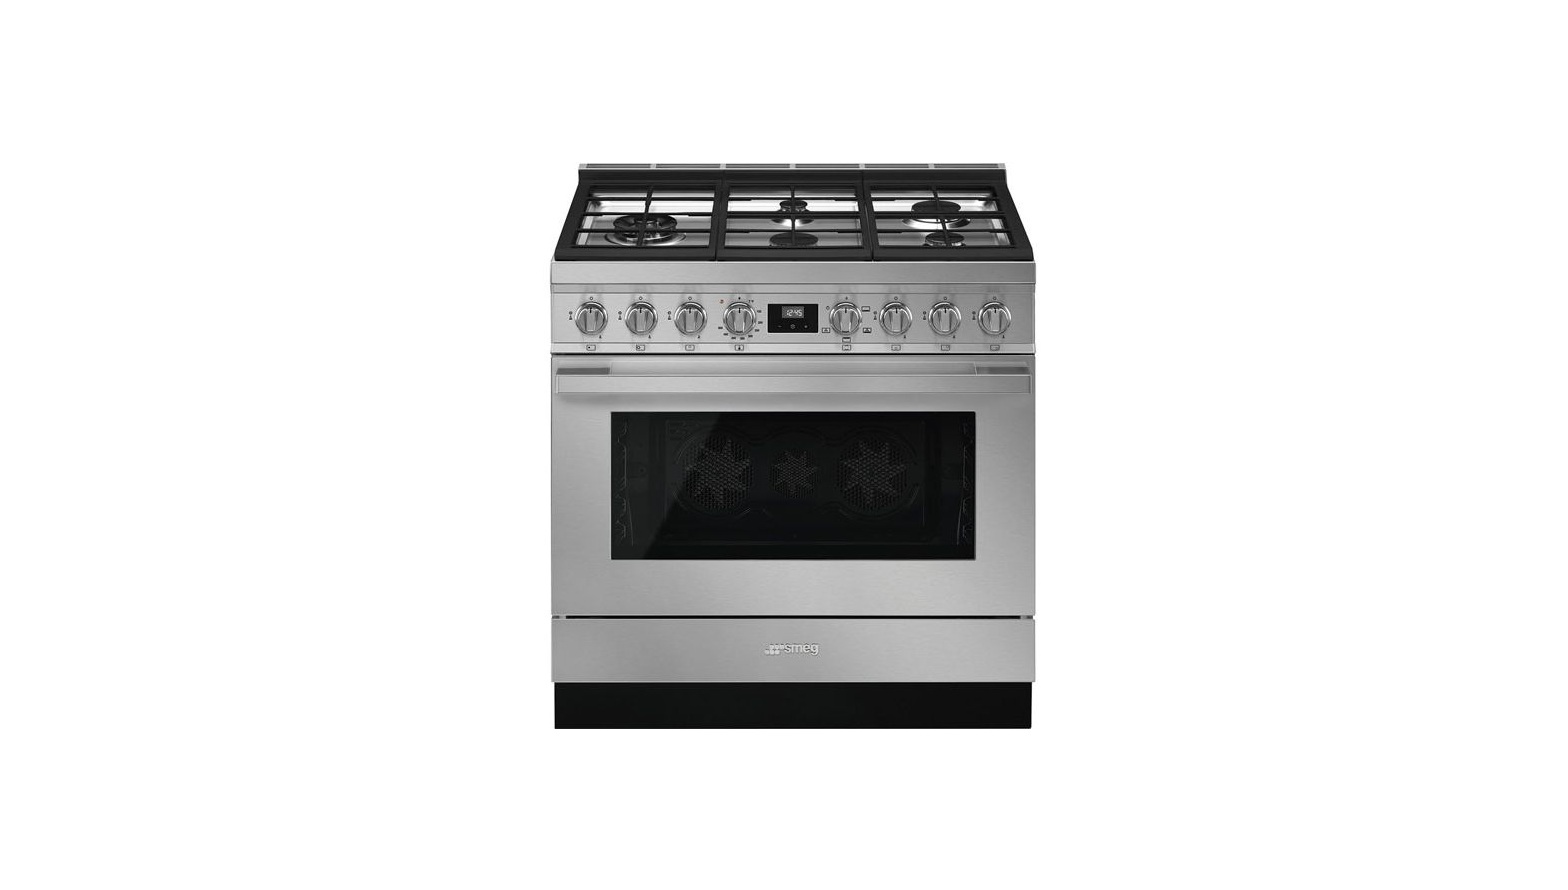 smeg CPF36UGGX Range, 36″, Portofino, Stainless steel, Main oven: Gas with grill User Guide